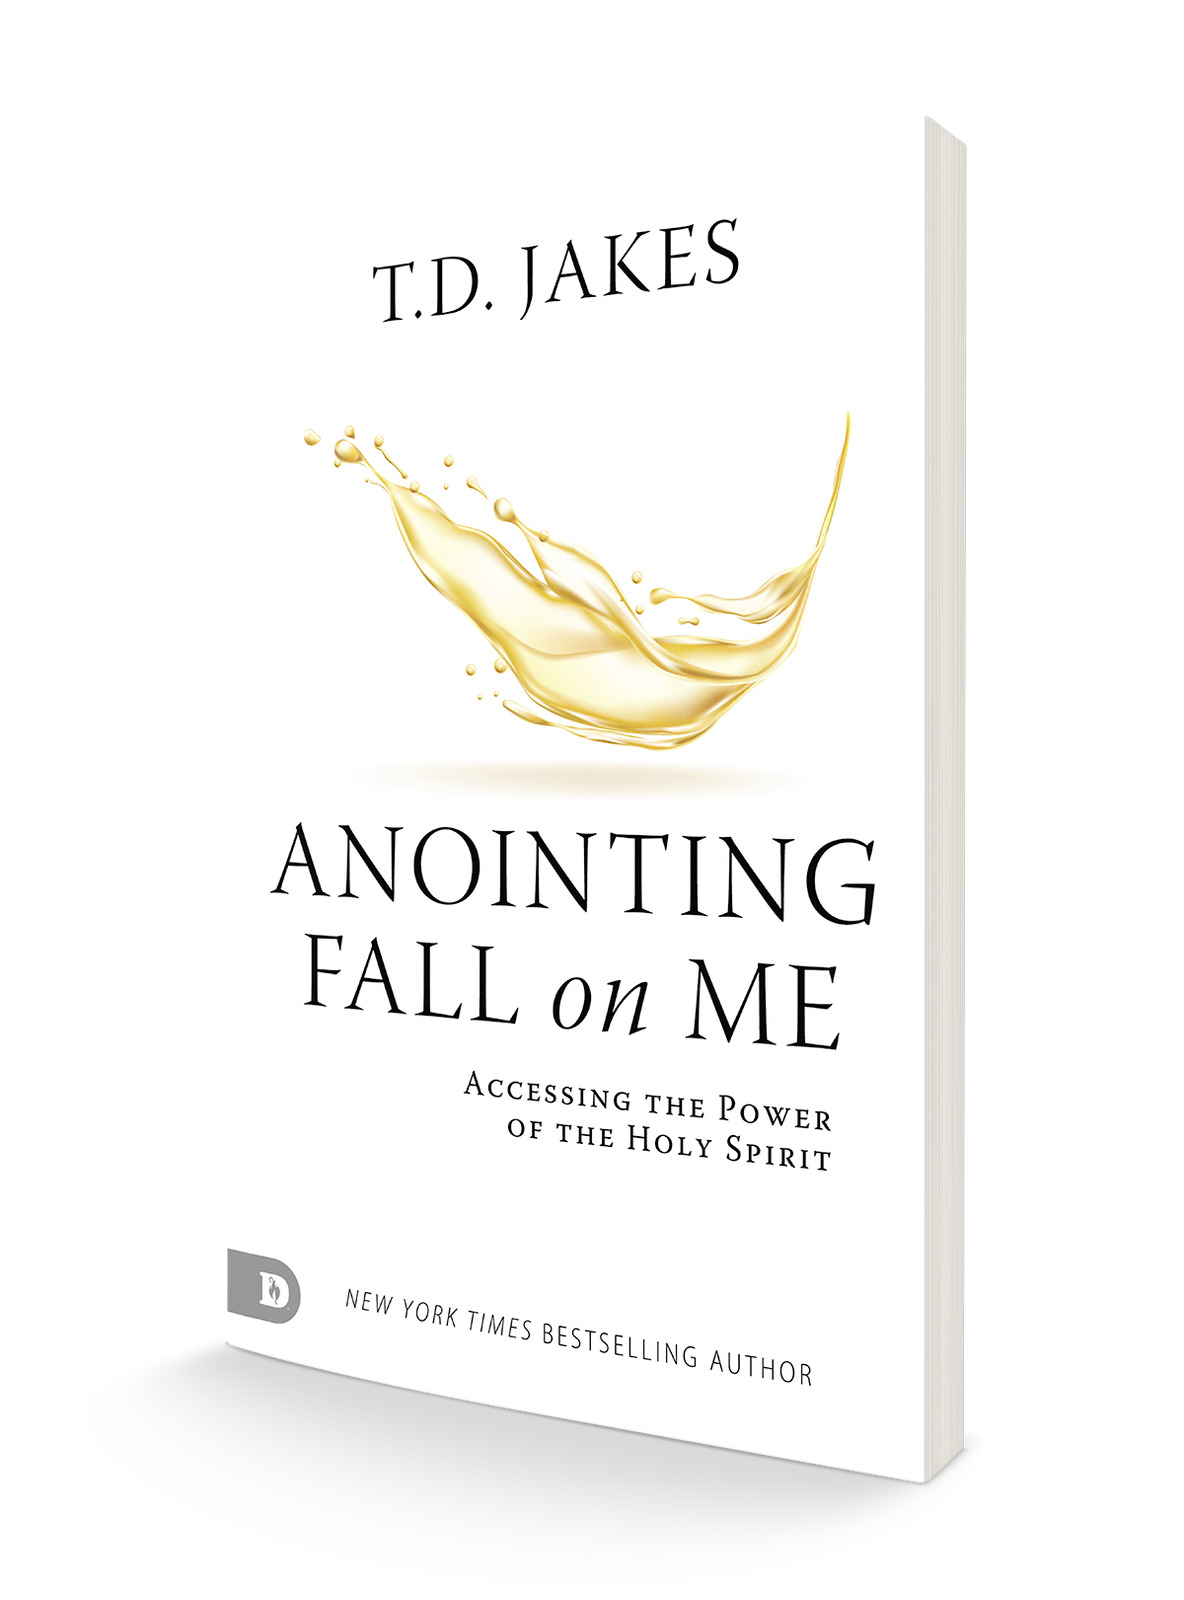 Anointing Fall On Me: Accessing the Power of the Holy Spirit Paperback – April 4